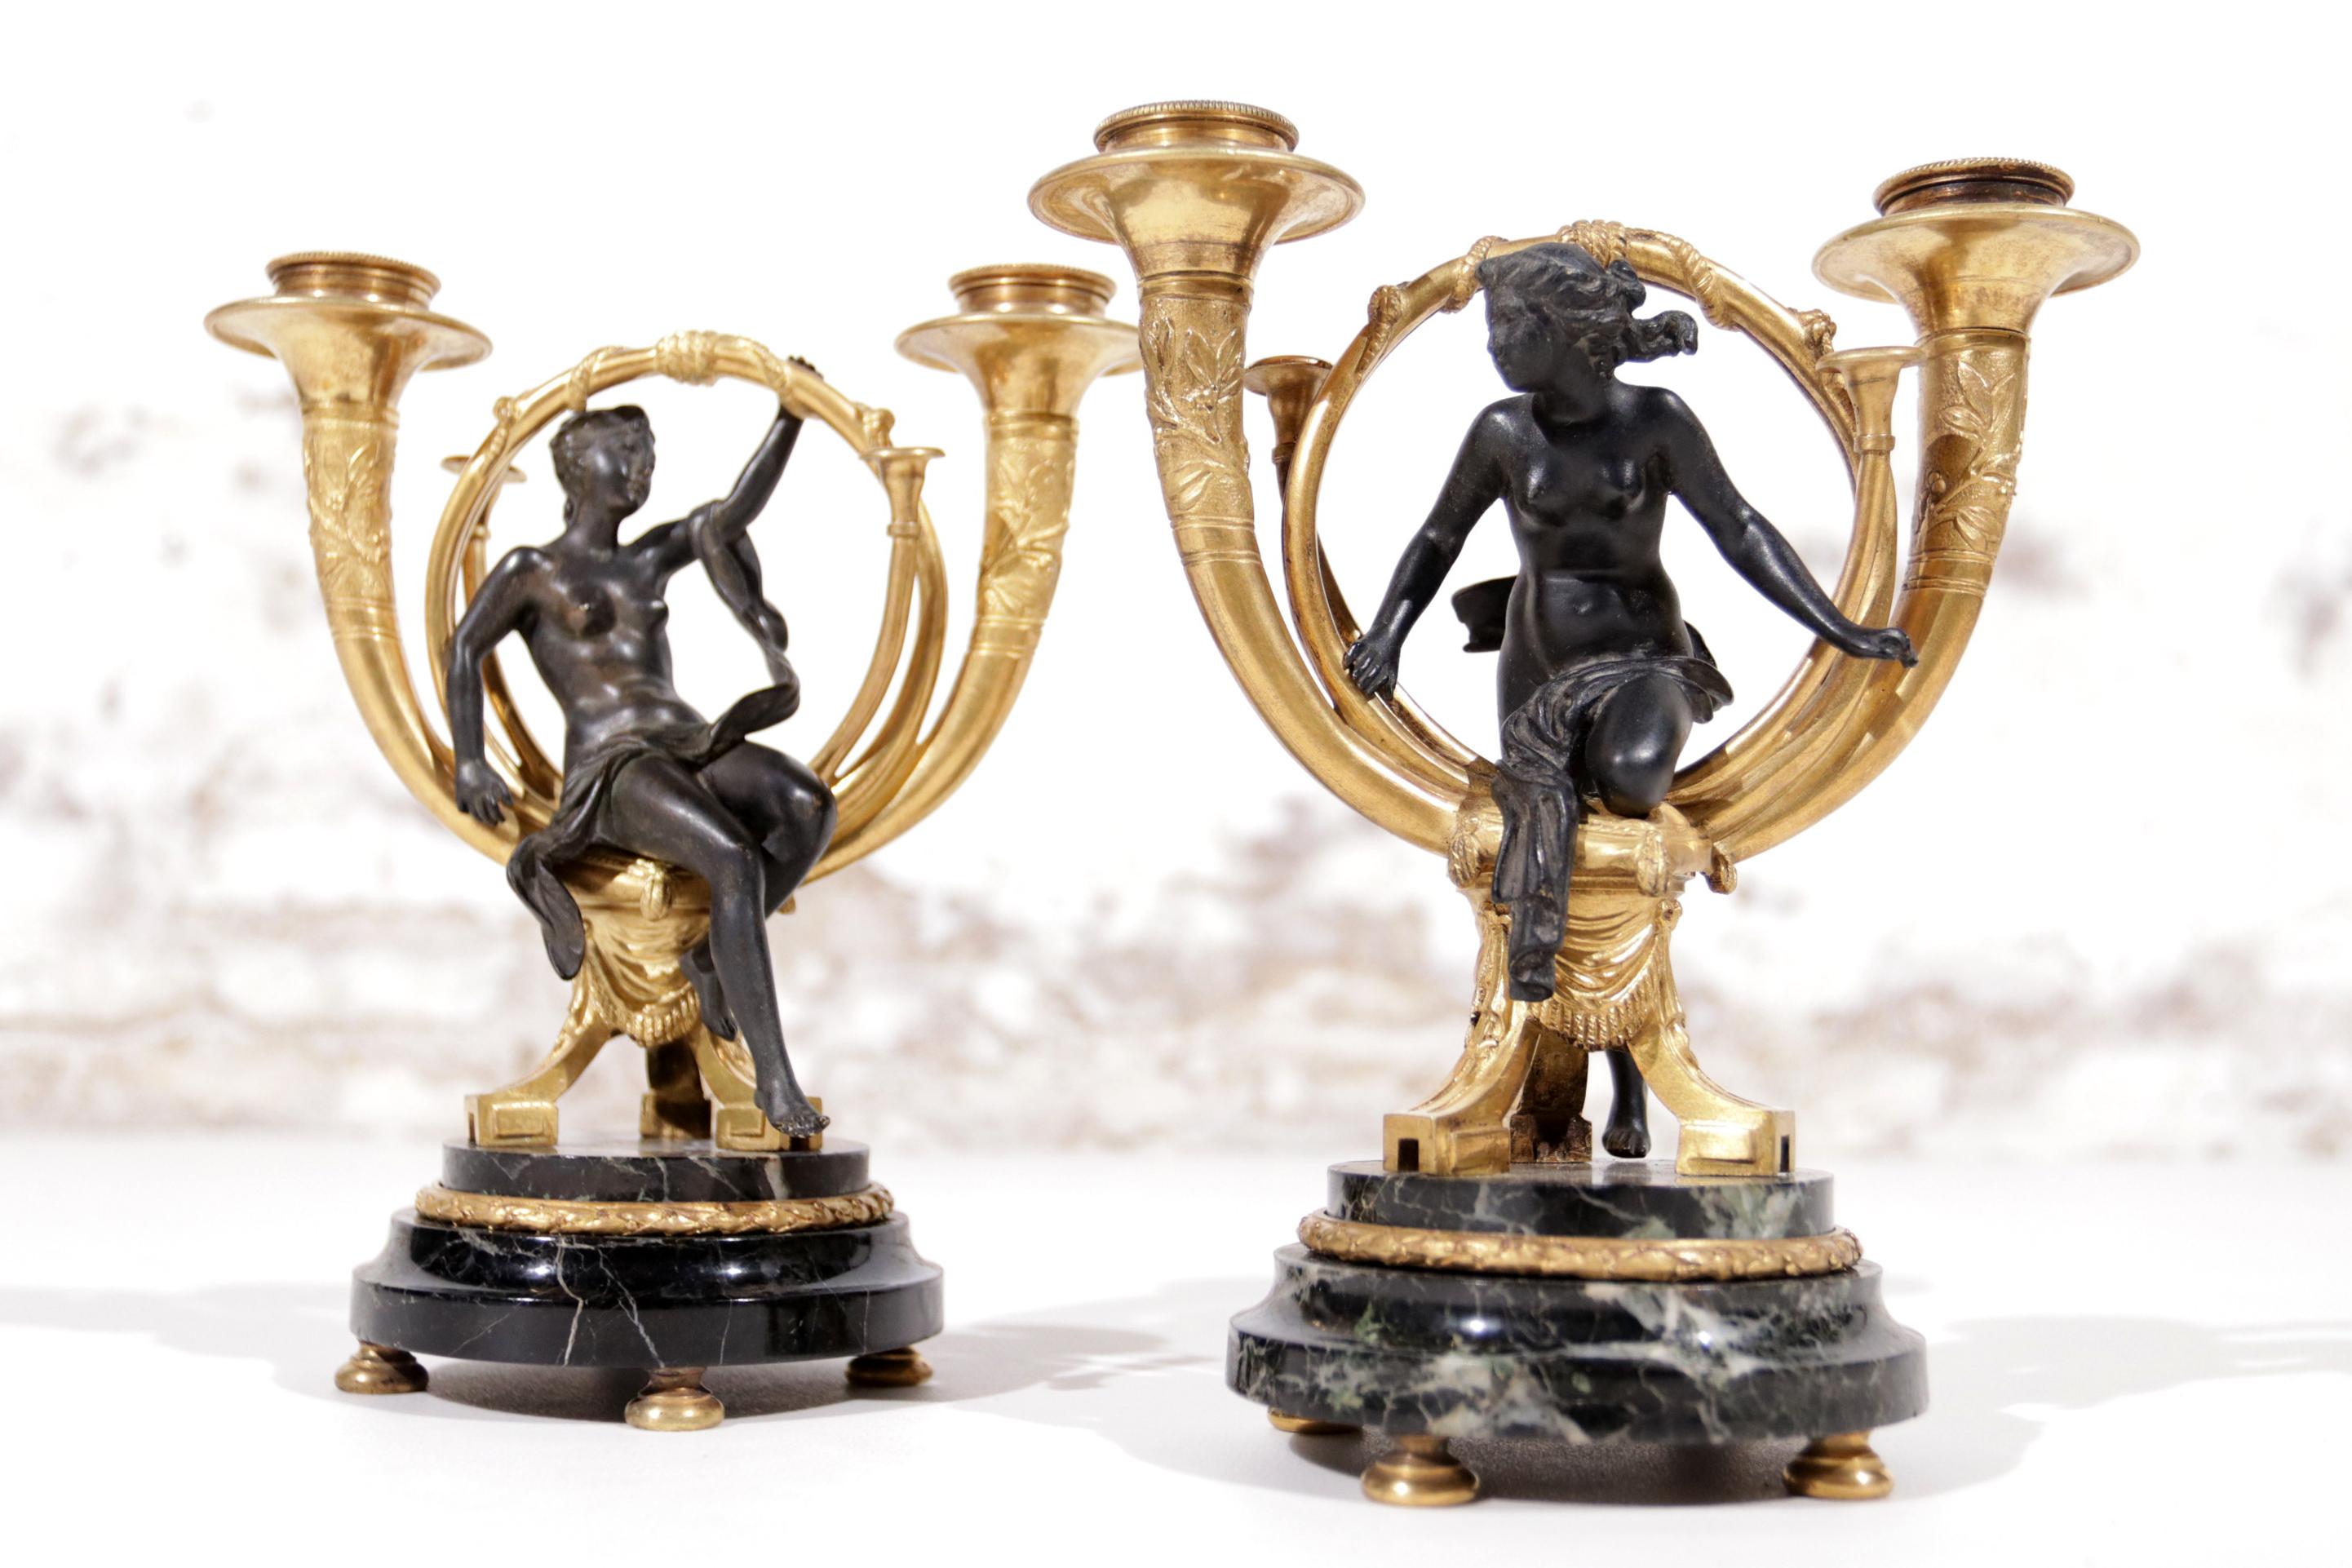 These candlesticks are ornate artifacts from the French Empire period, which dates back to the early 19th century, typically considered as the reign of Napoleon I from 1804 to 1814. This era is known for its classical designs and motifs that often